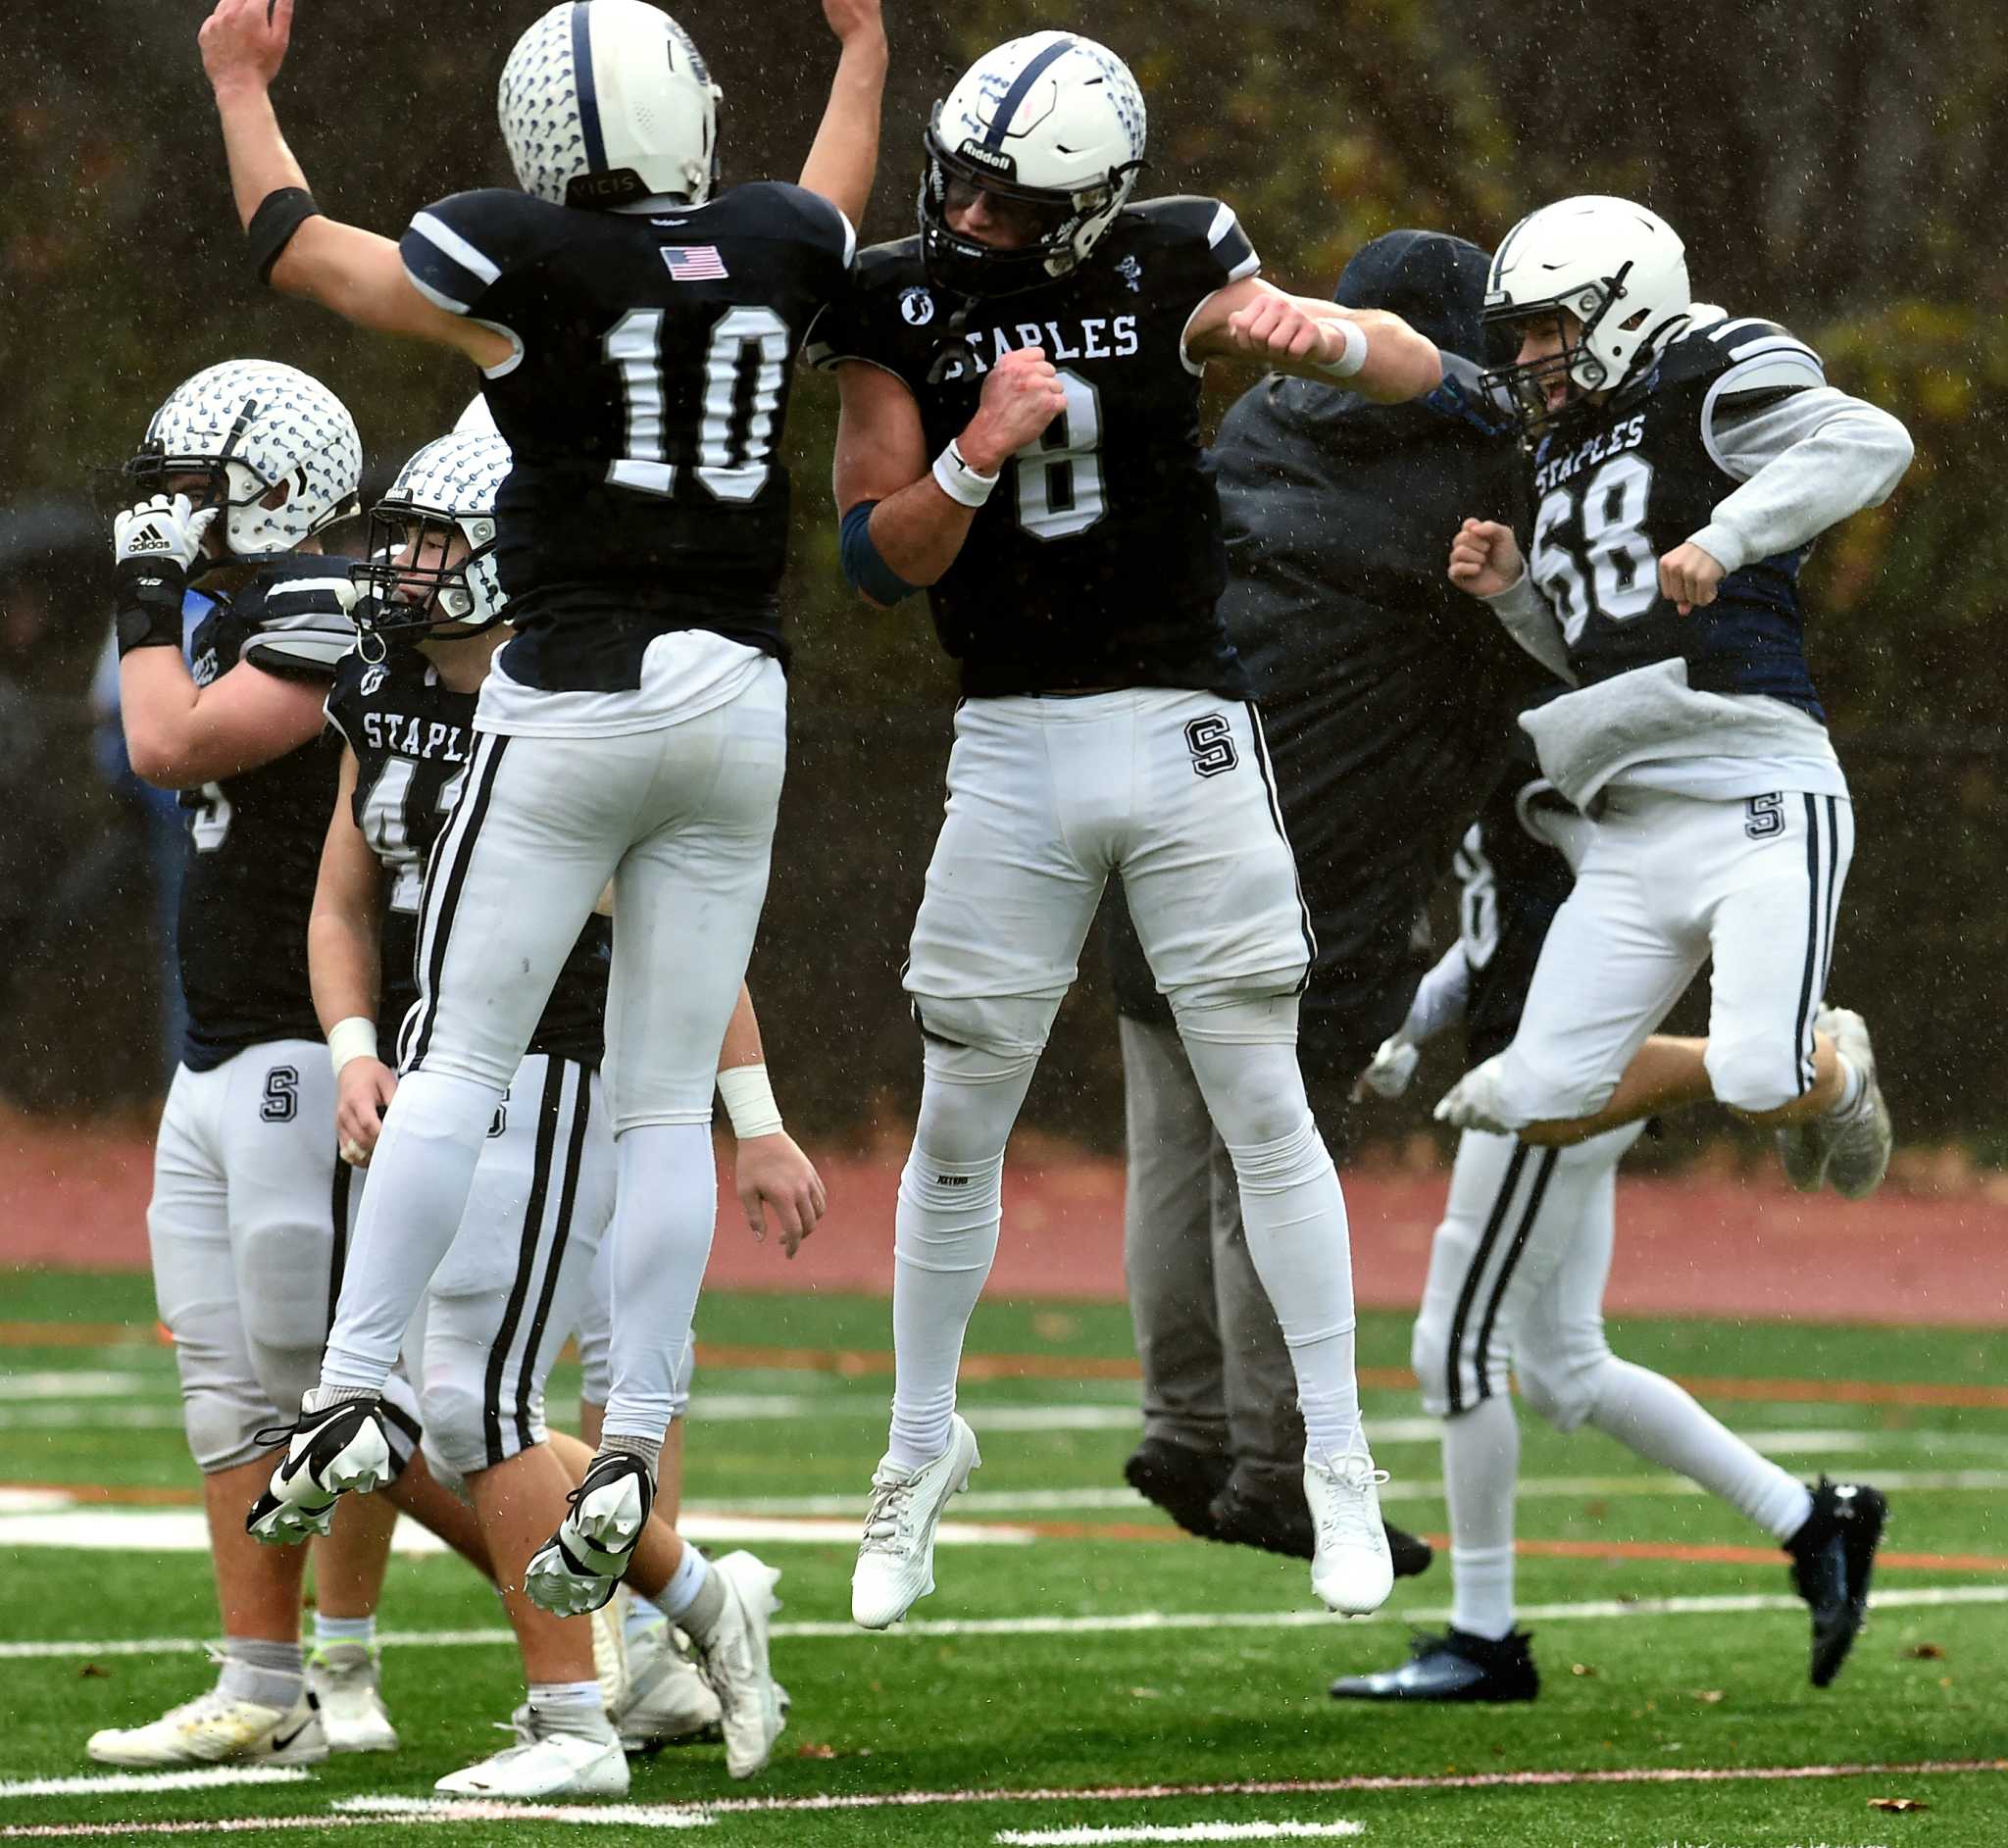 Staples wins CIAC Class LL football championship over West Haven